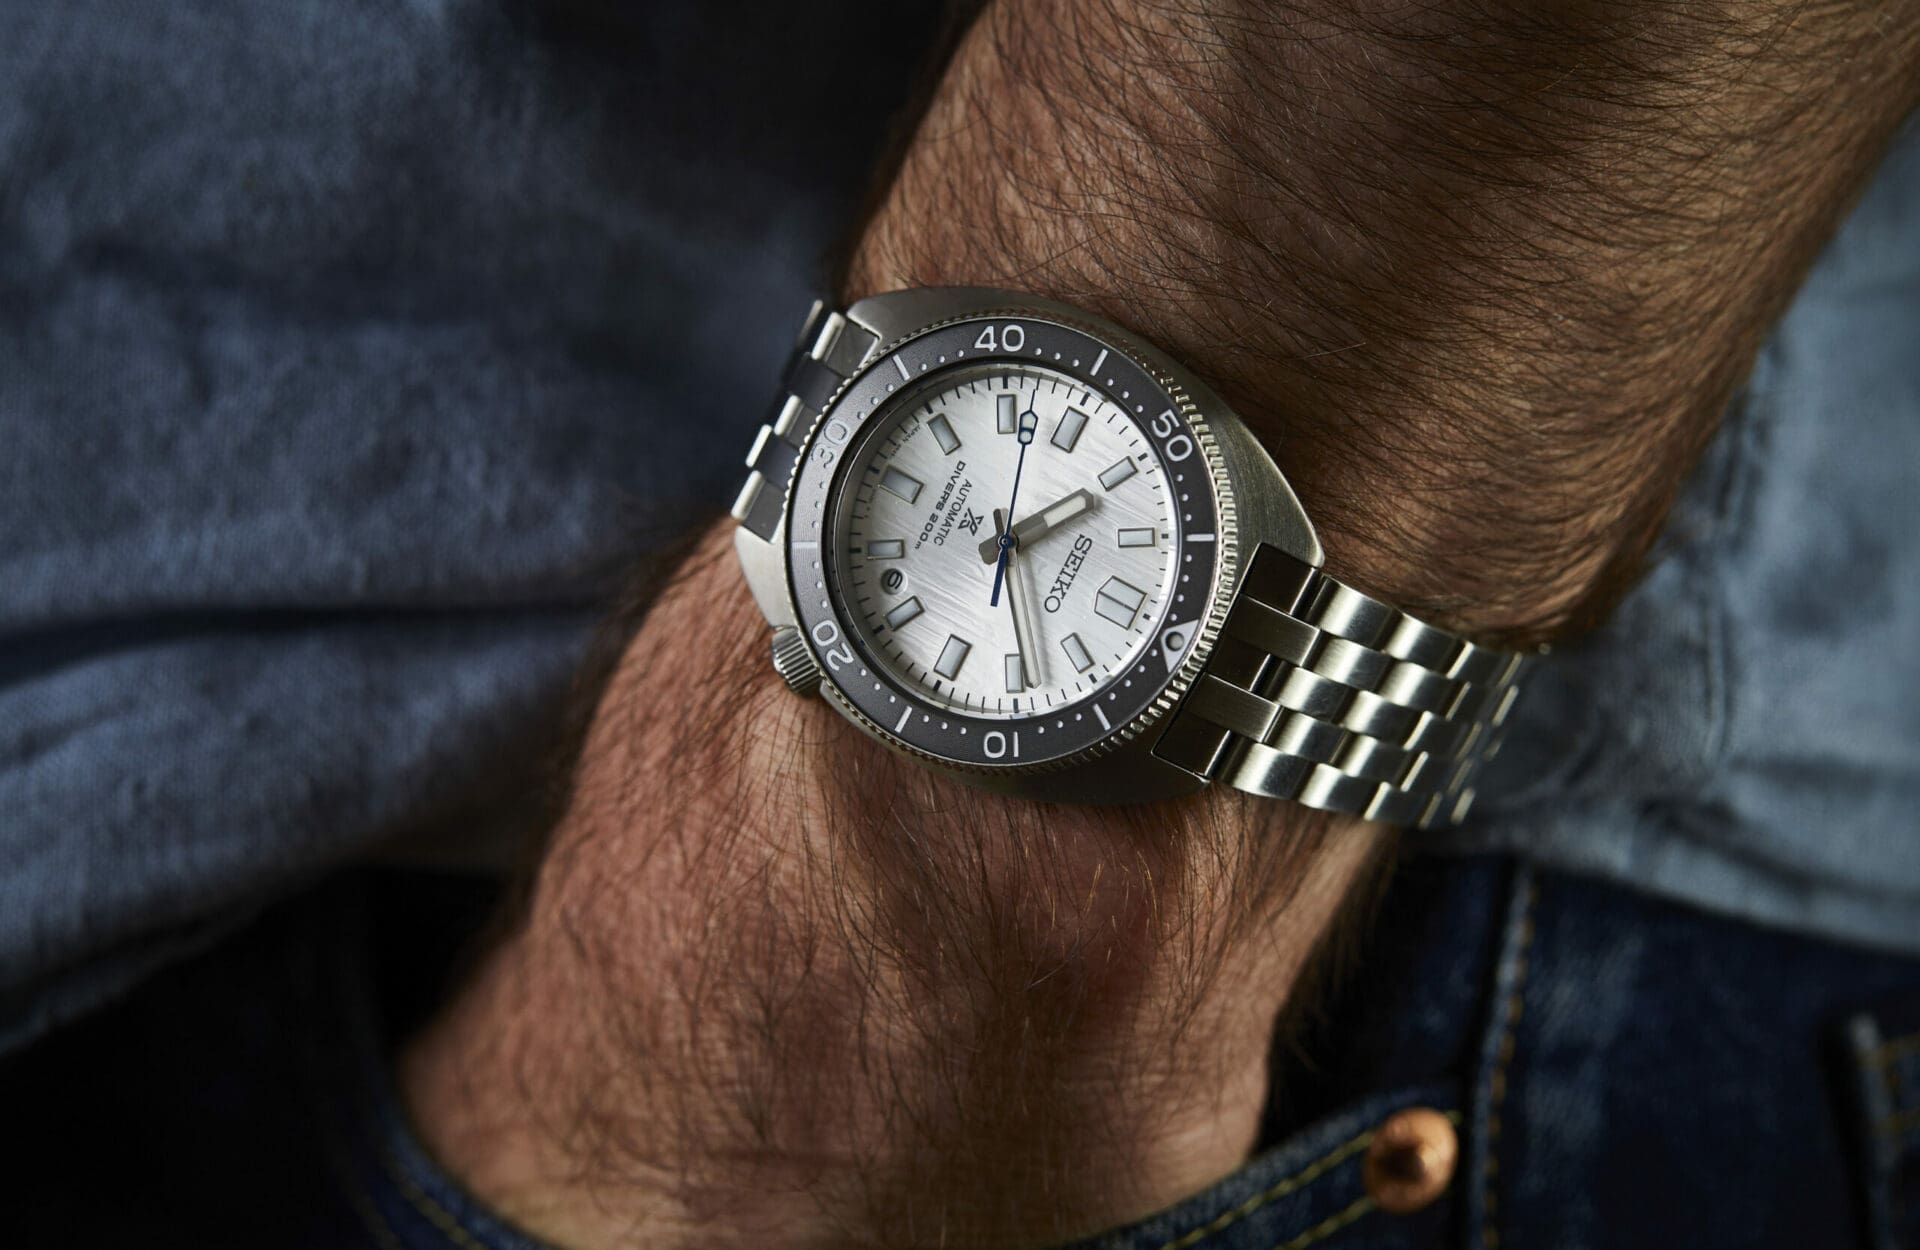 HANDS-ON: The Seiko SPB333 Save The Ocean Limited Edition